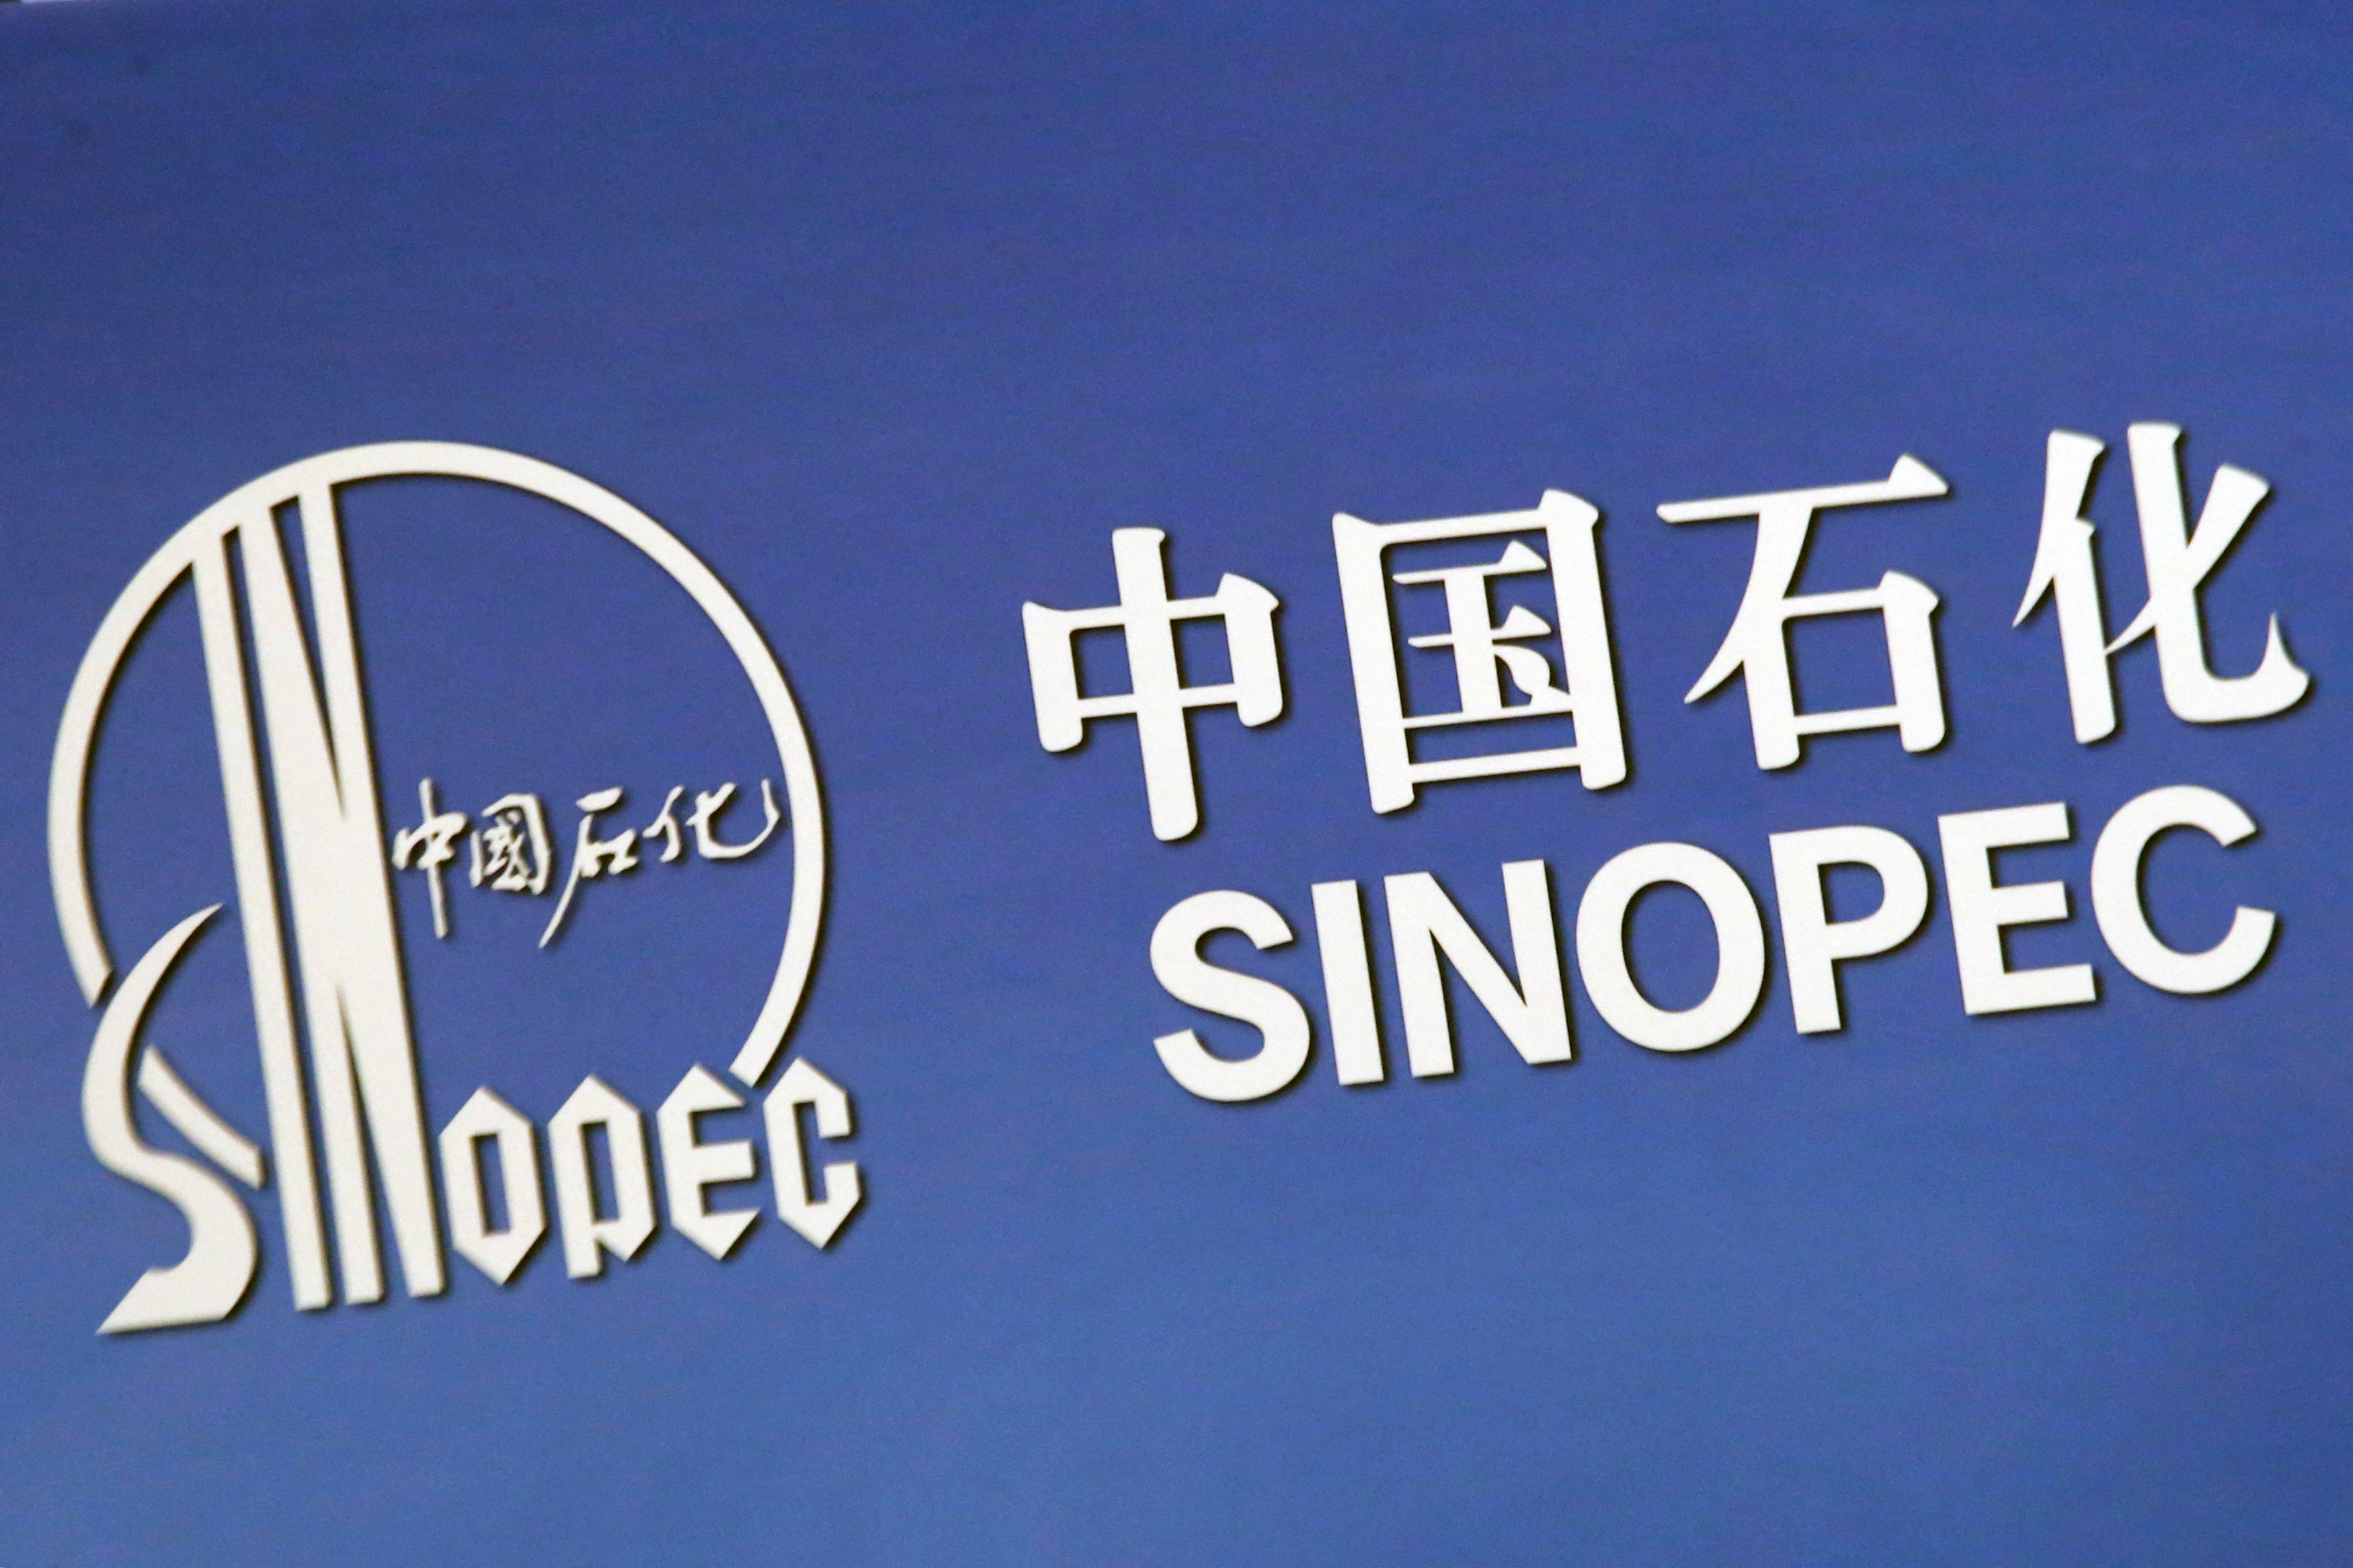 The company logo of China’s Sinopec Corp is displayed at a news conference in Hong Kong